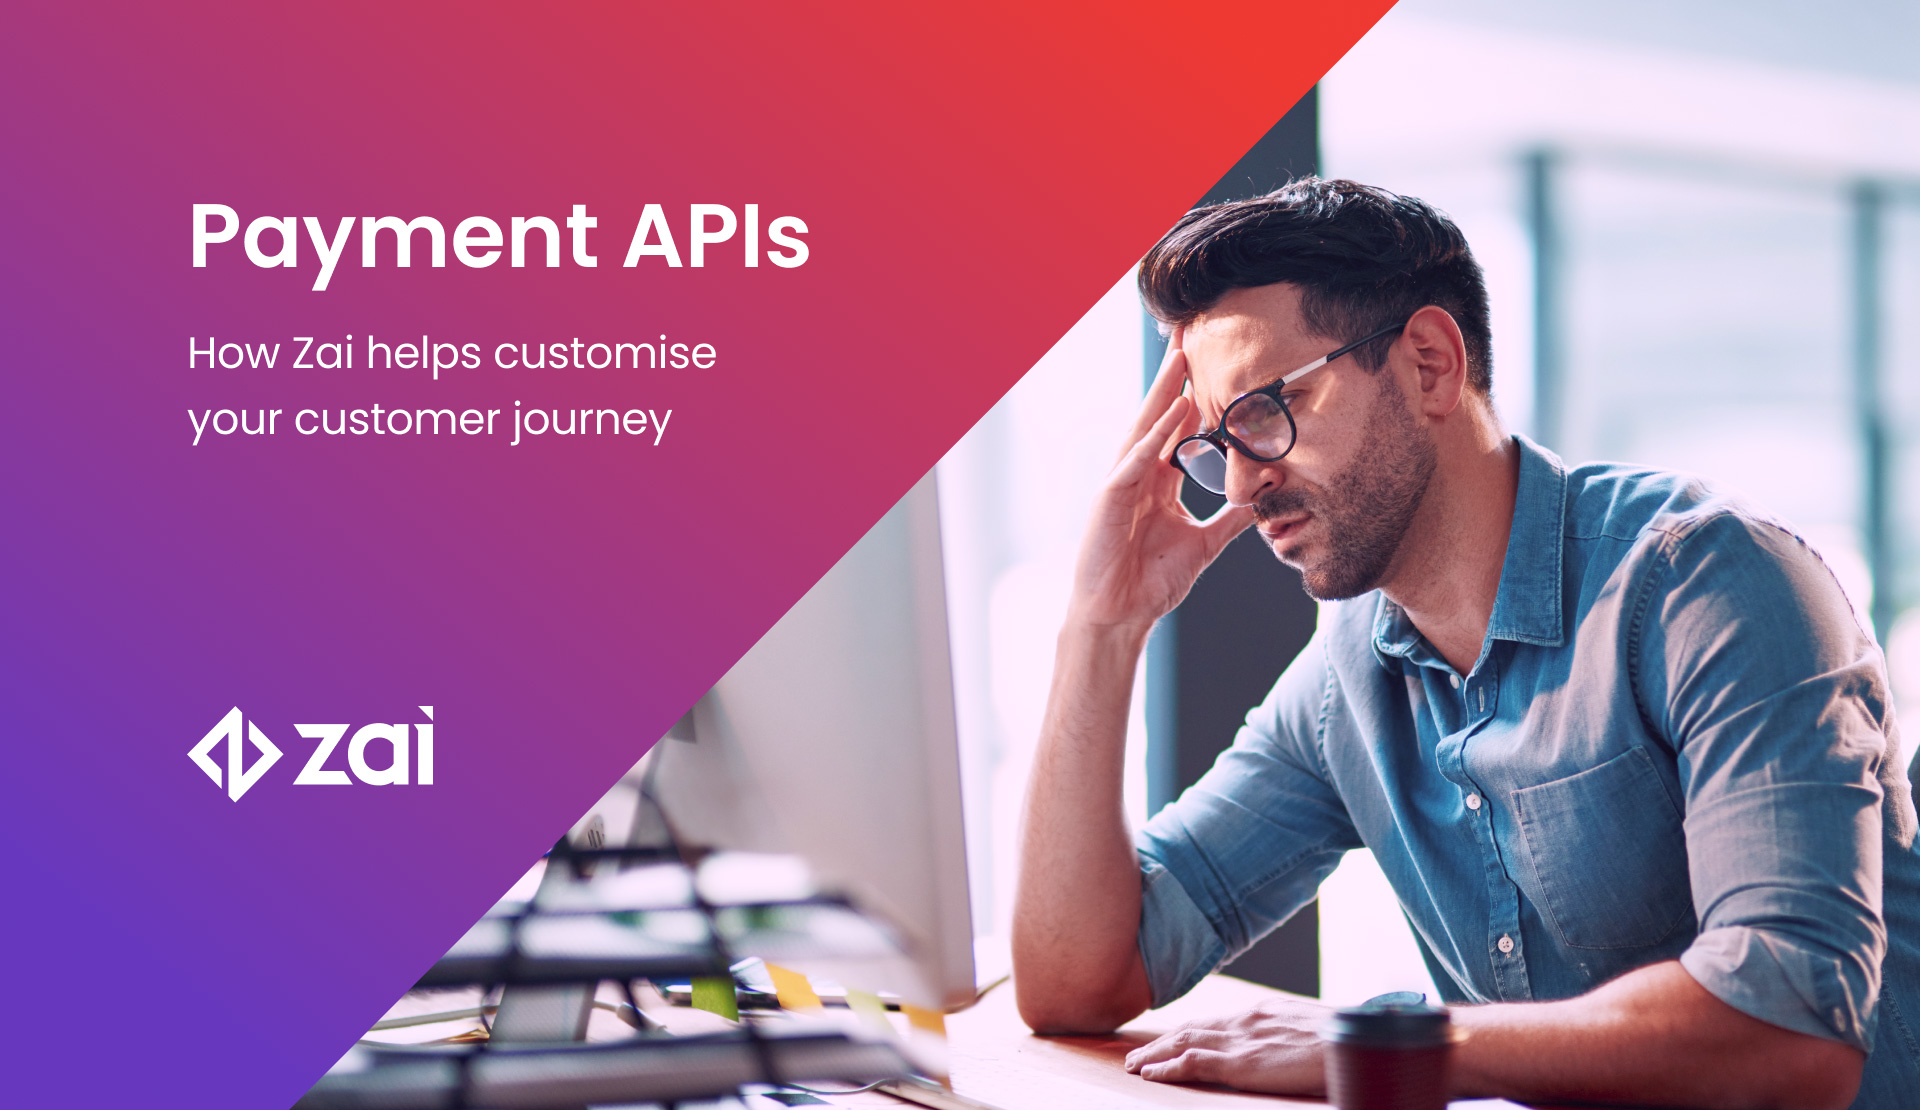 Payment APIs: How Zai helps customise your customer journey